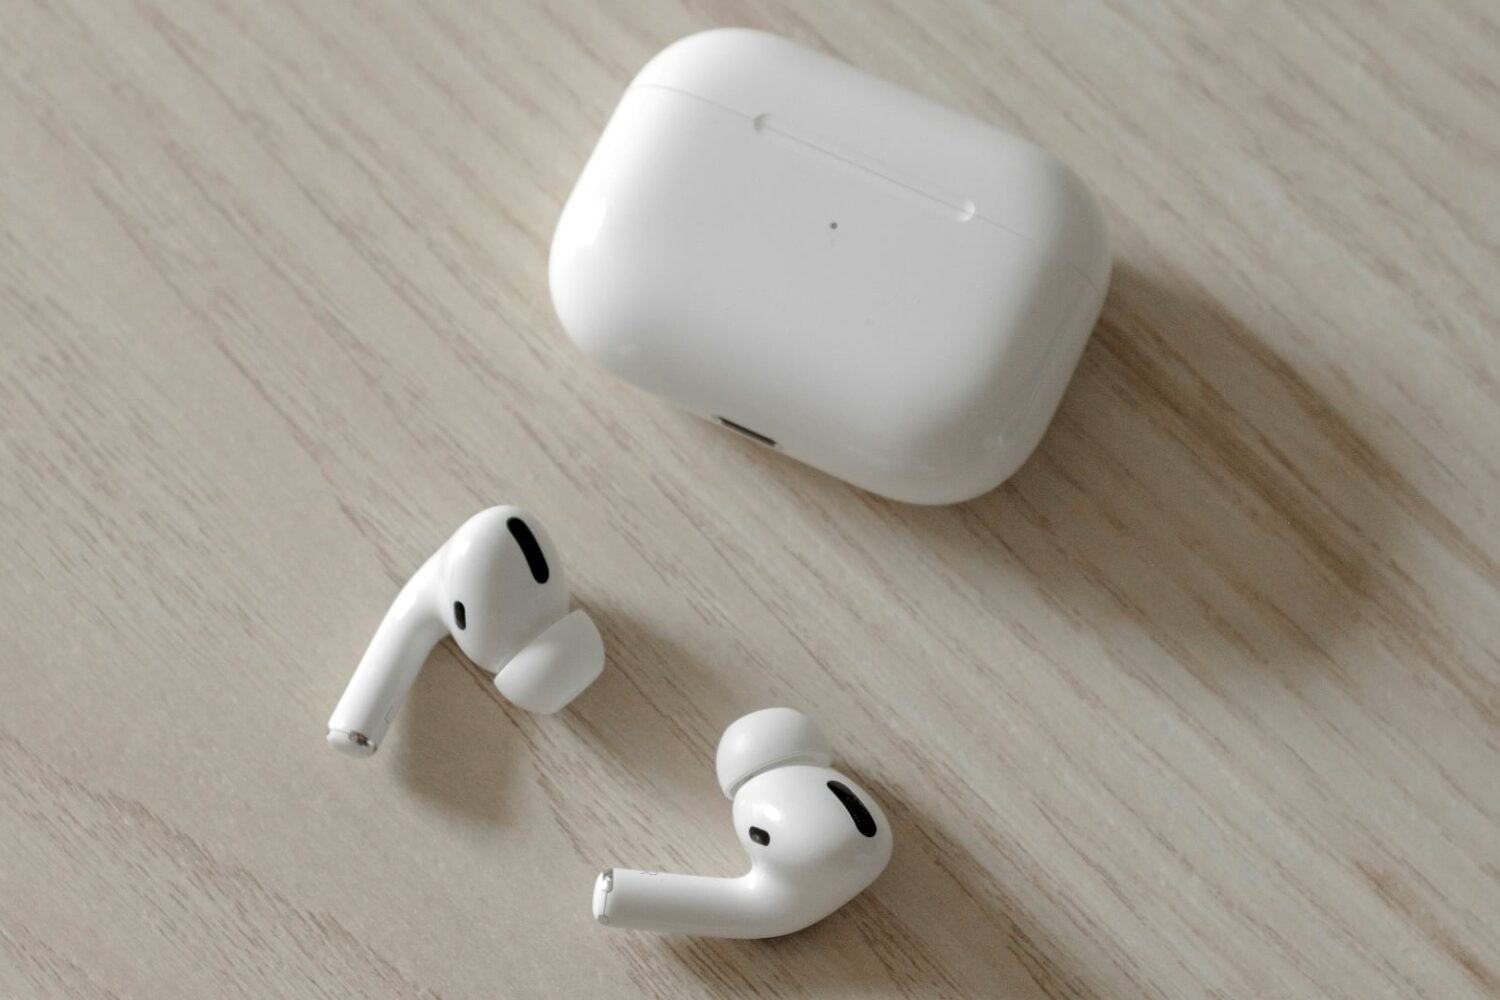 Apple's AirPods Pro earbuds on a wooden desk